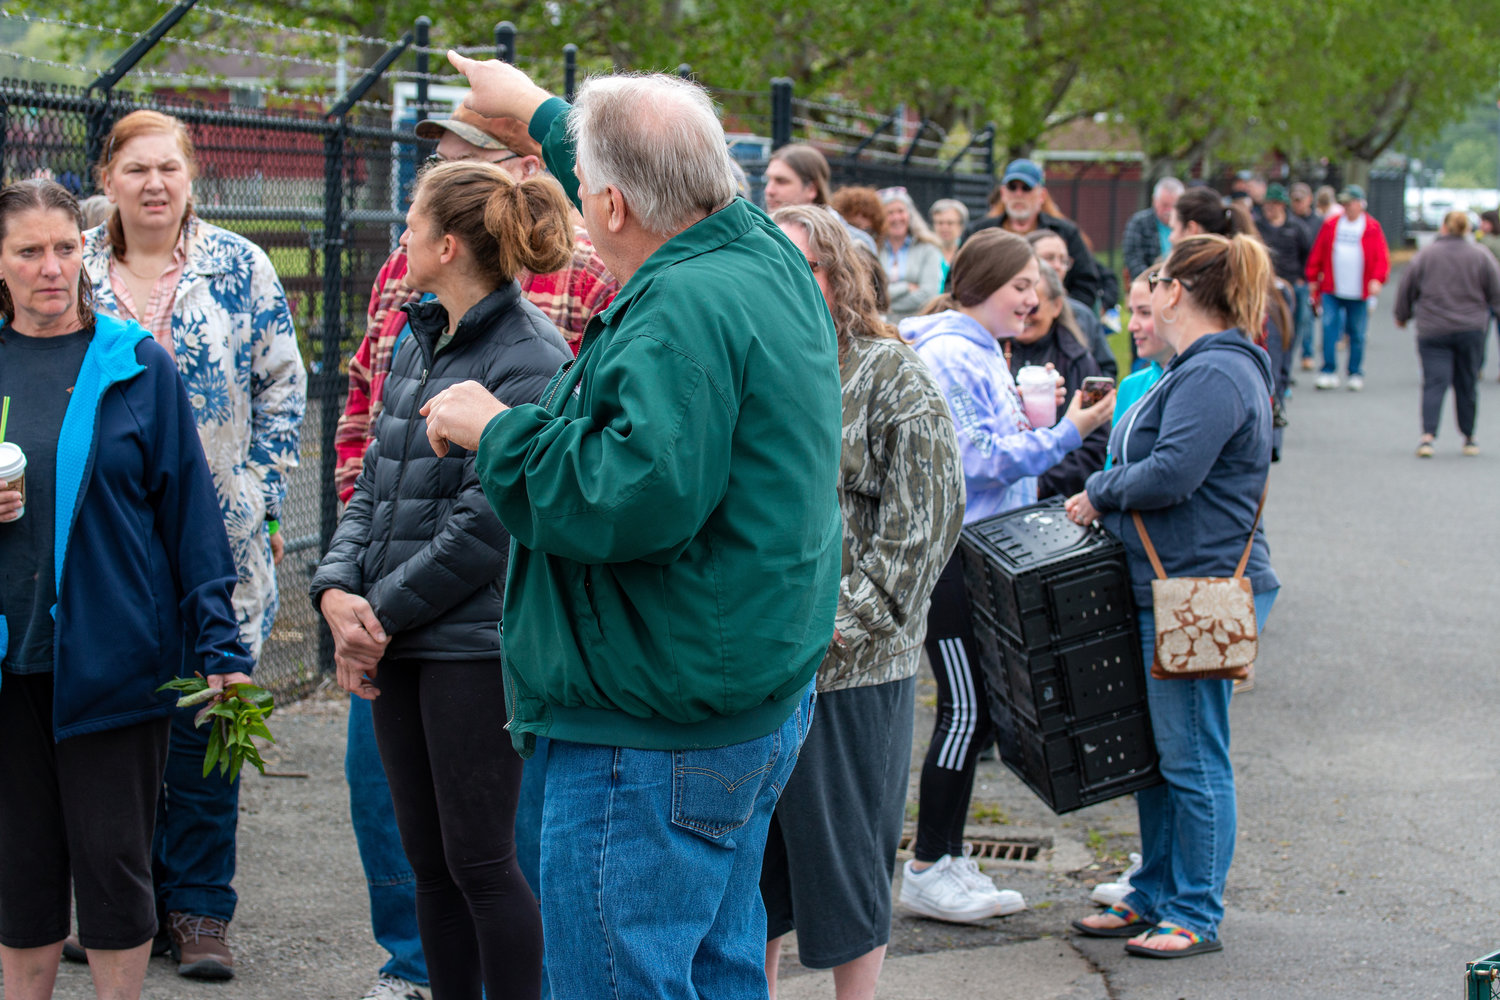 A long line forms outside at the Master Gardener Plant Sale at the Southwest Washington Fairgrounds Saturday.